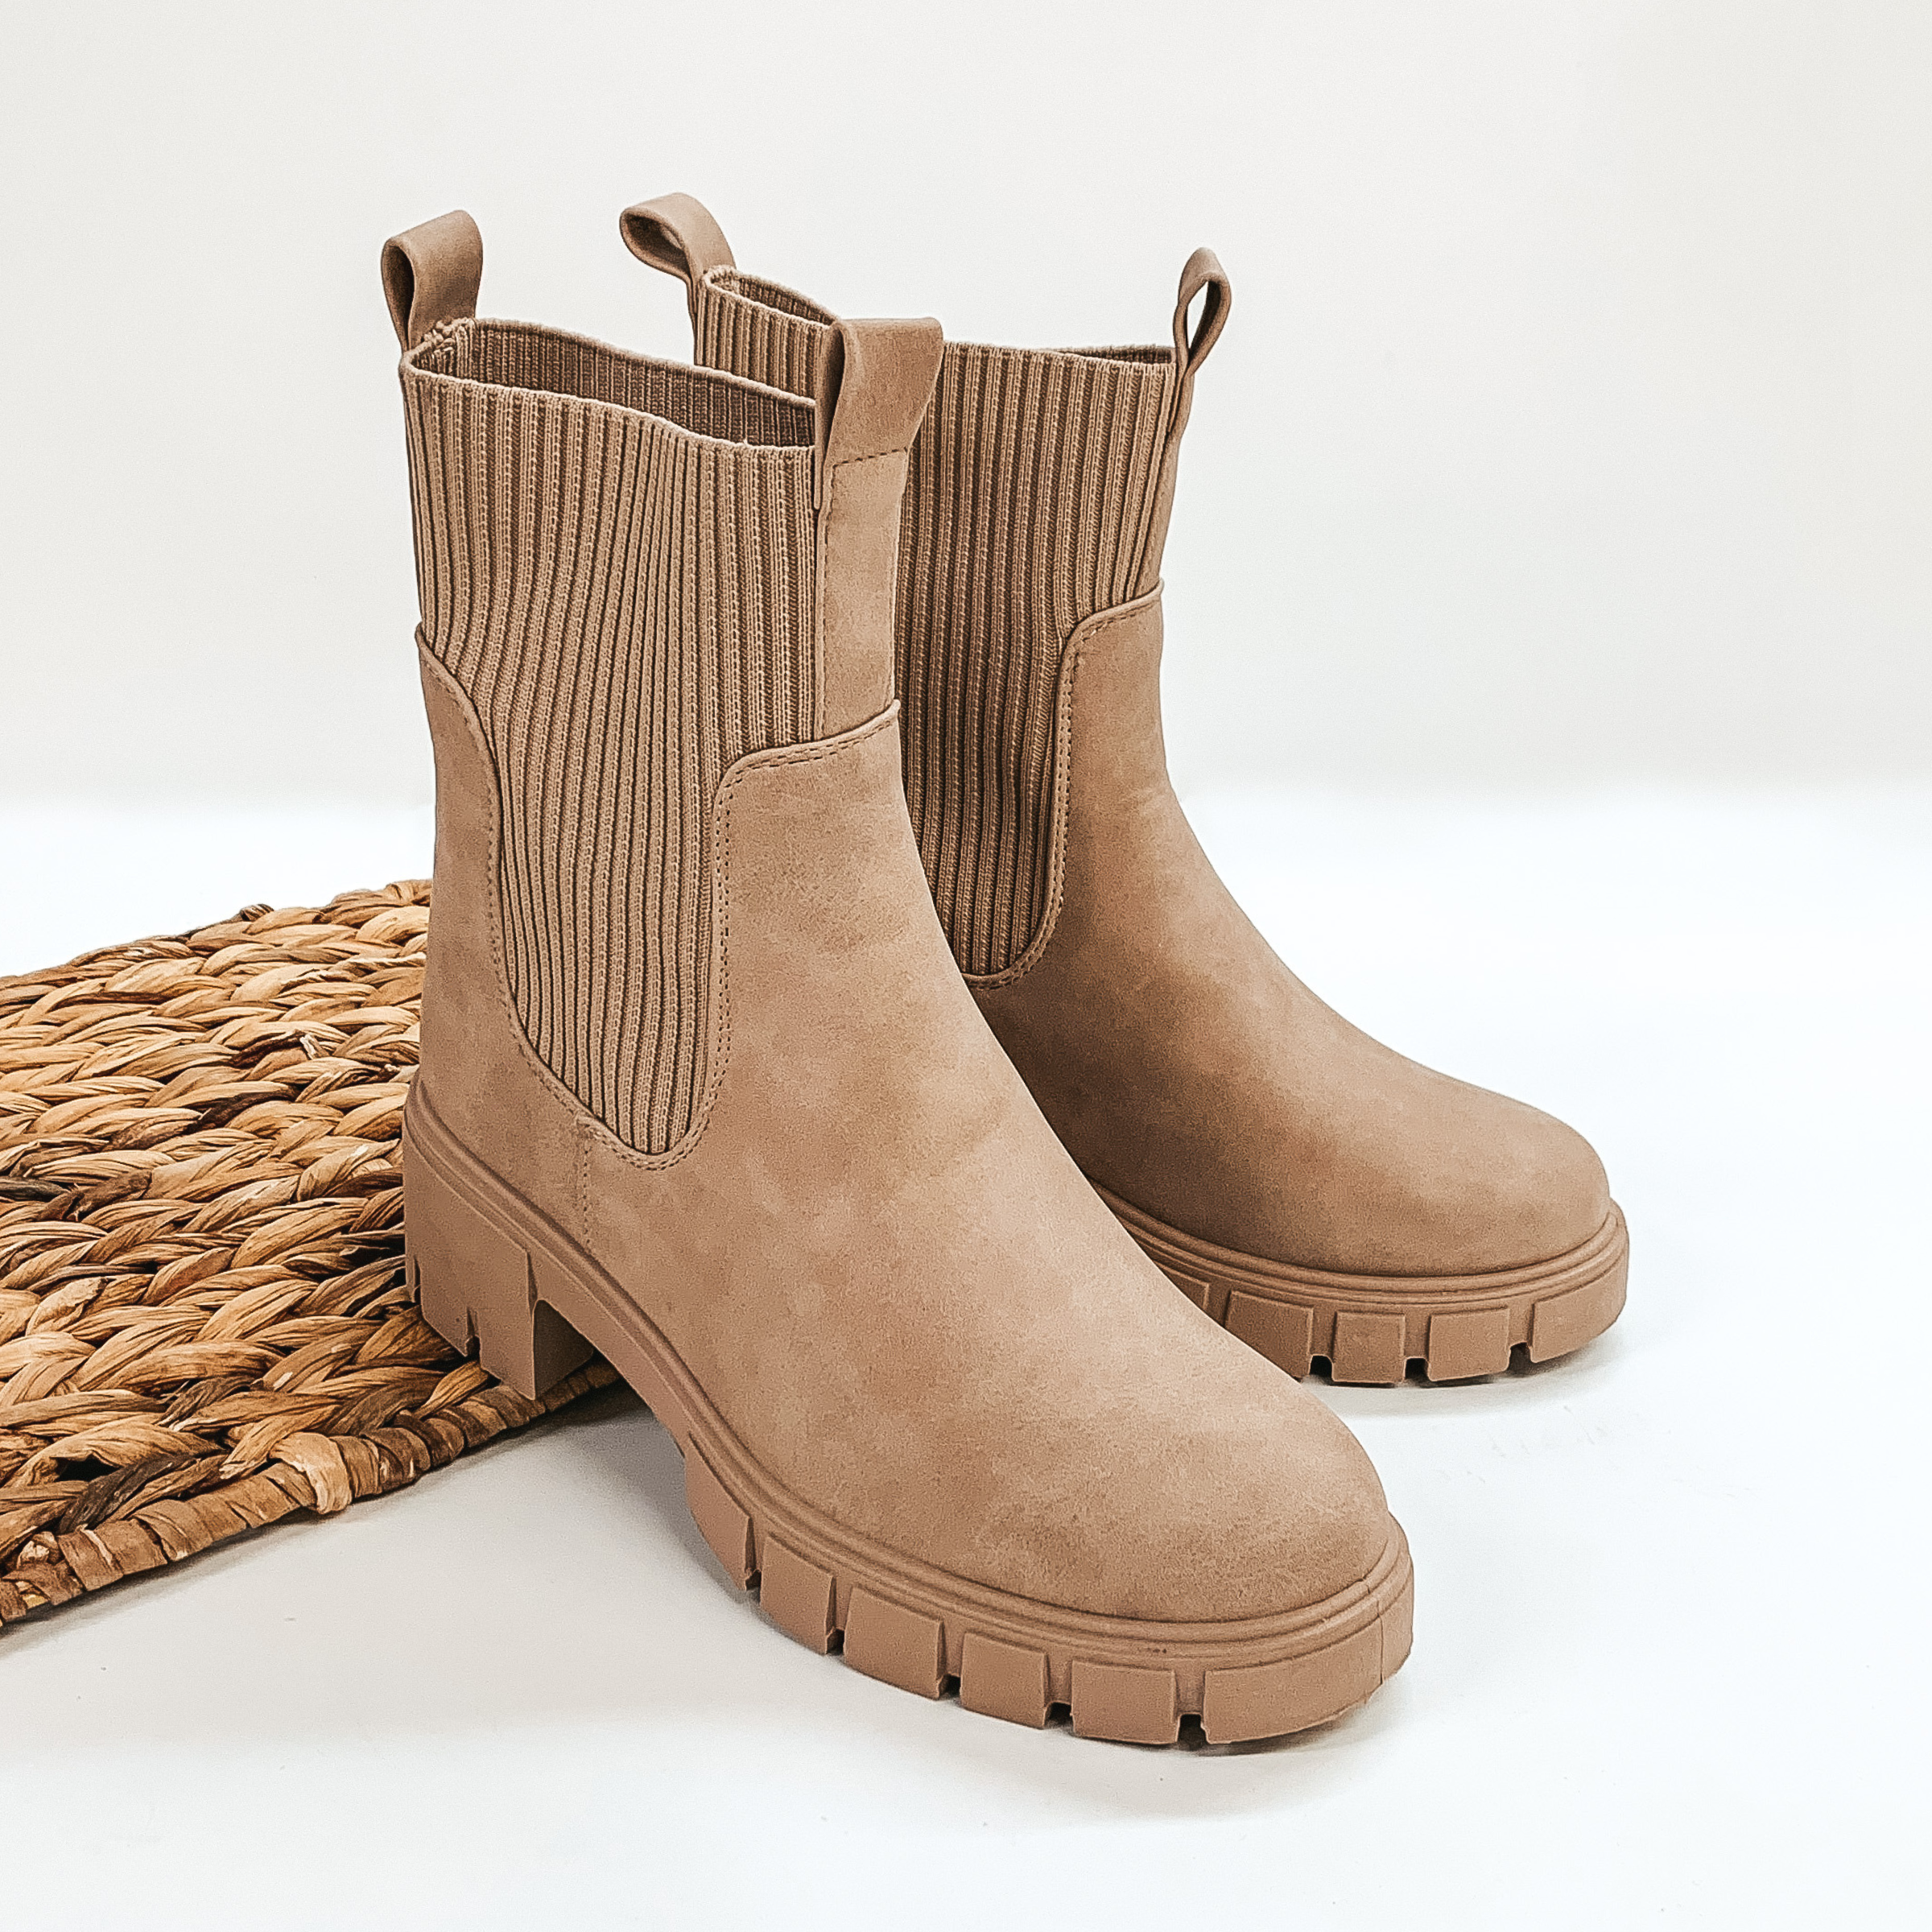 Ankle high taupe colored slip on bootie. The sides are elastic and also have a front and back pull on tab. These booties are pictured propped on a basket weave material on a white background. 